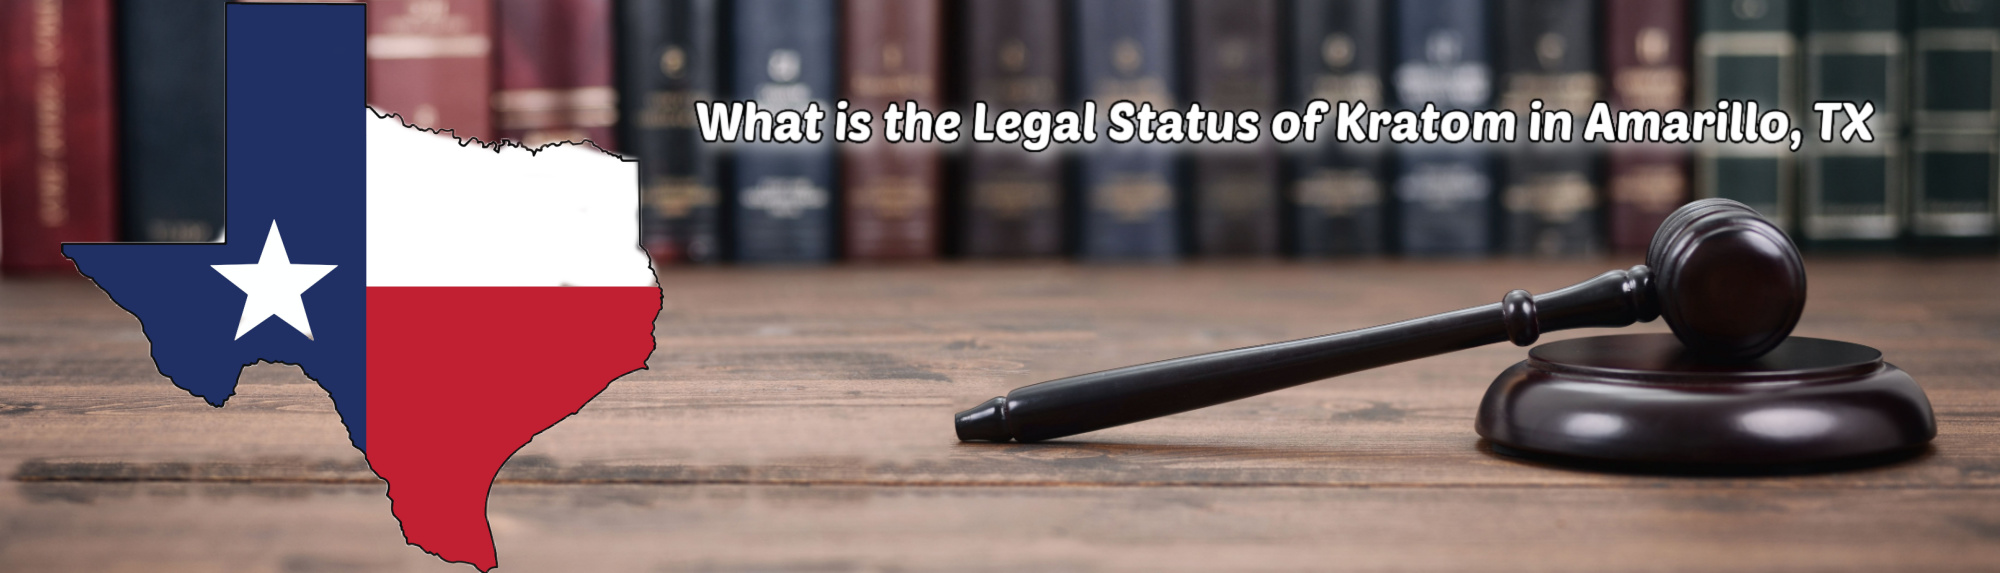 image of what is the legal status of kratom in amarillo tx